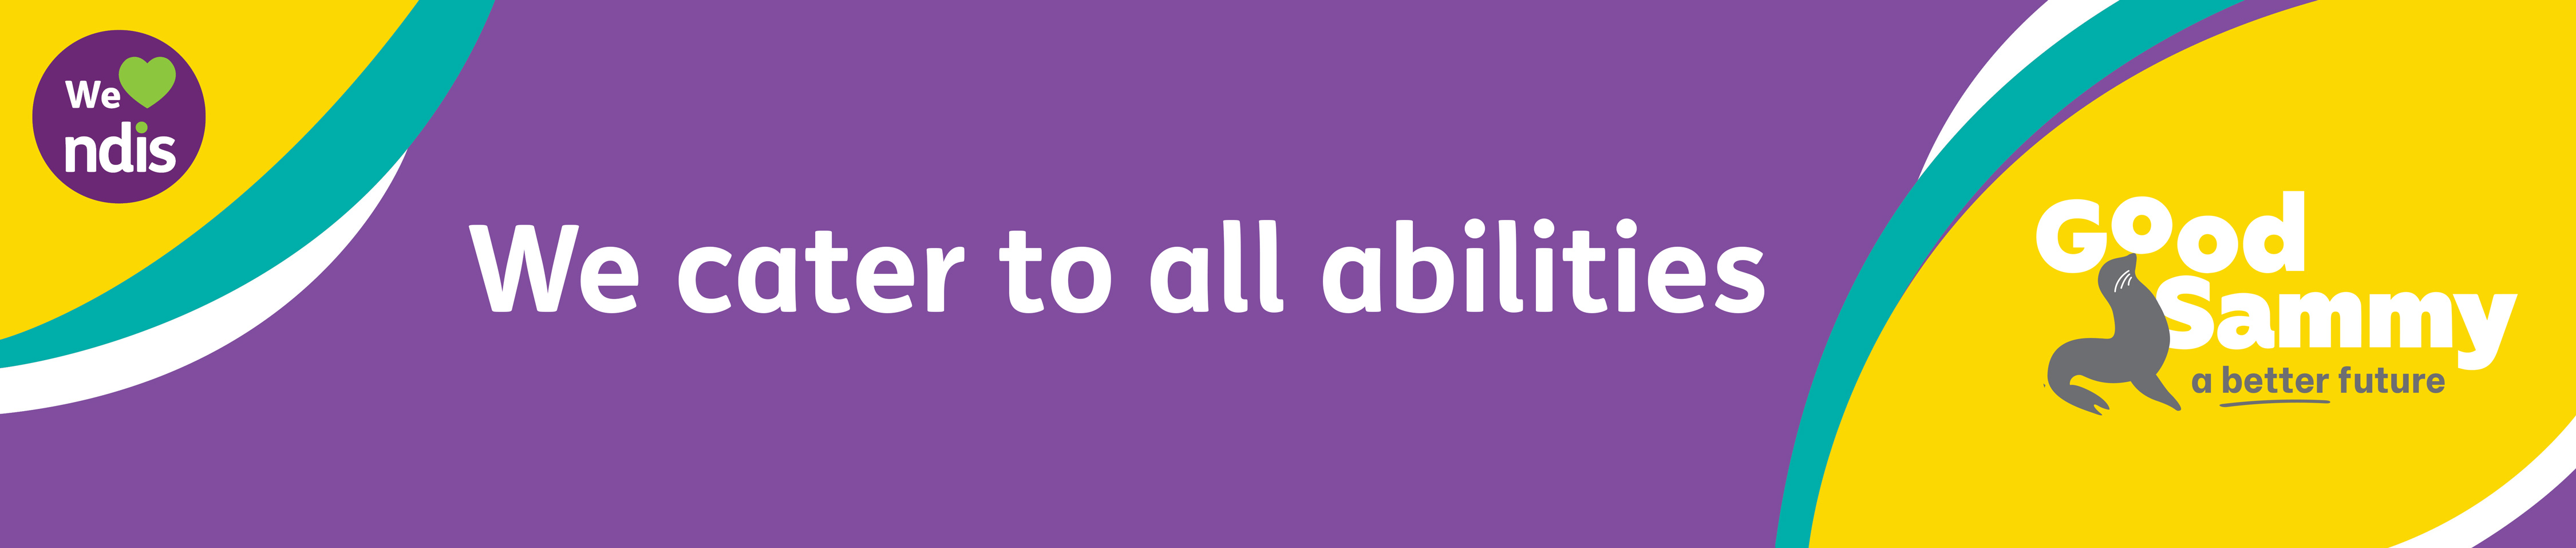 We cater to all abilities